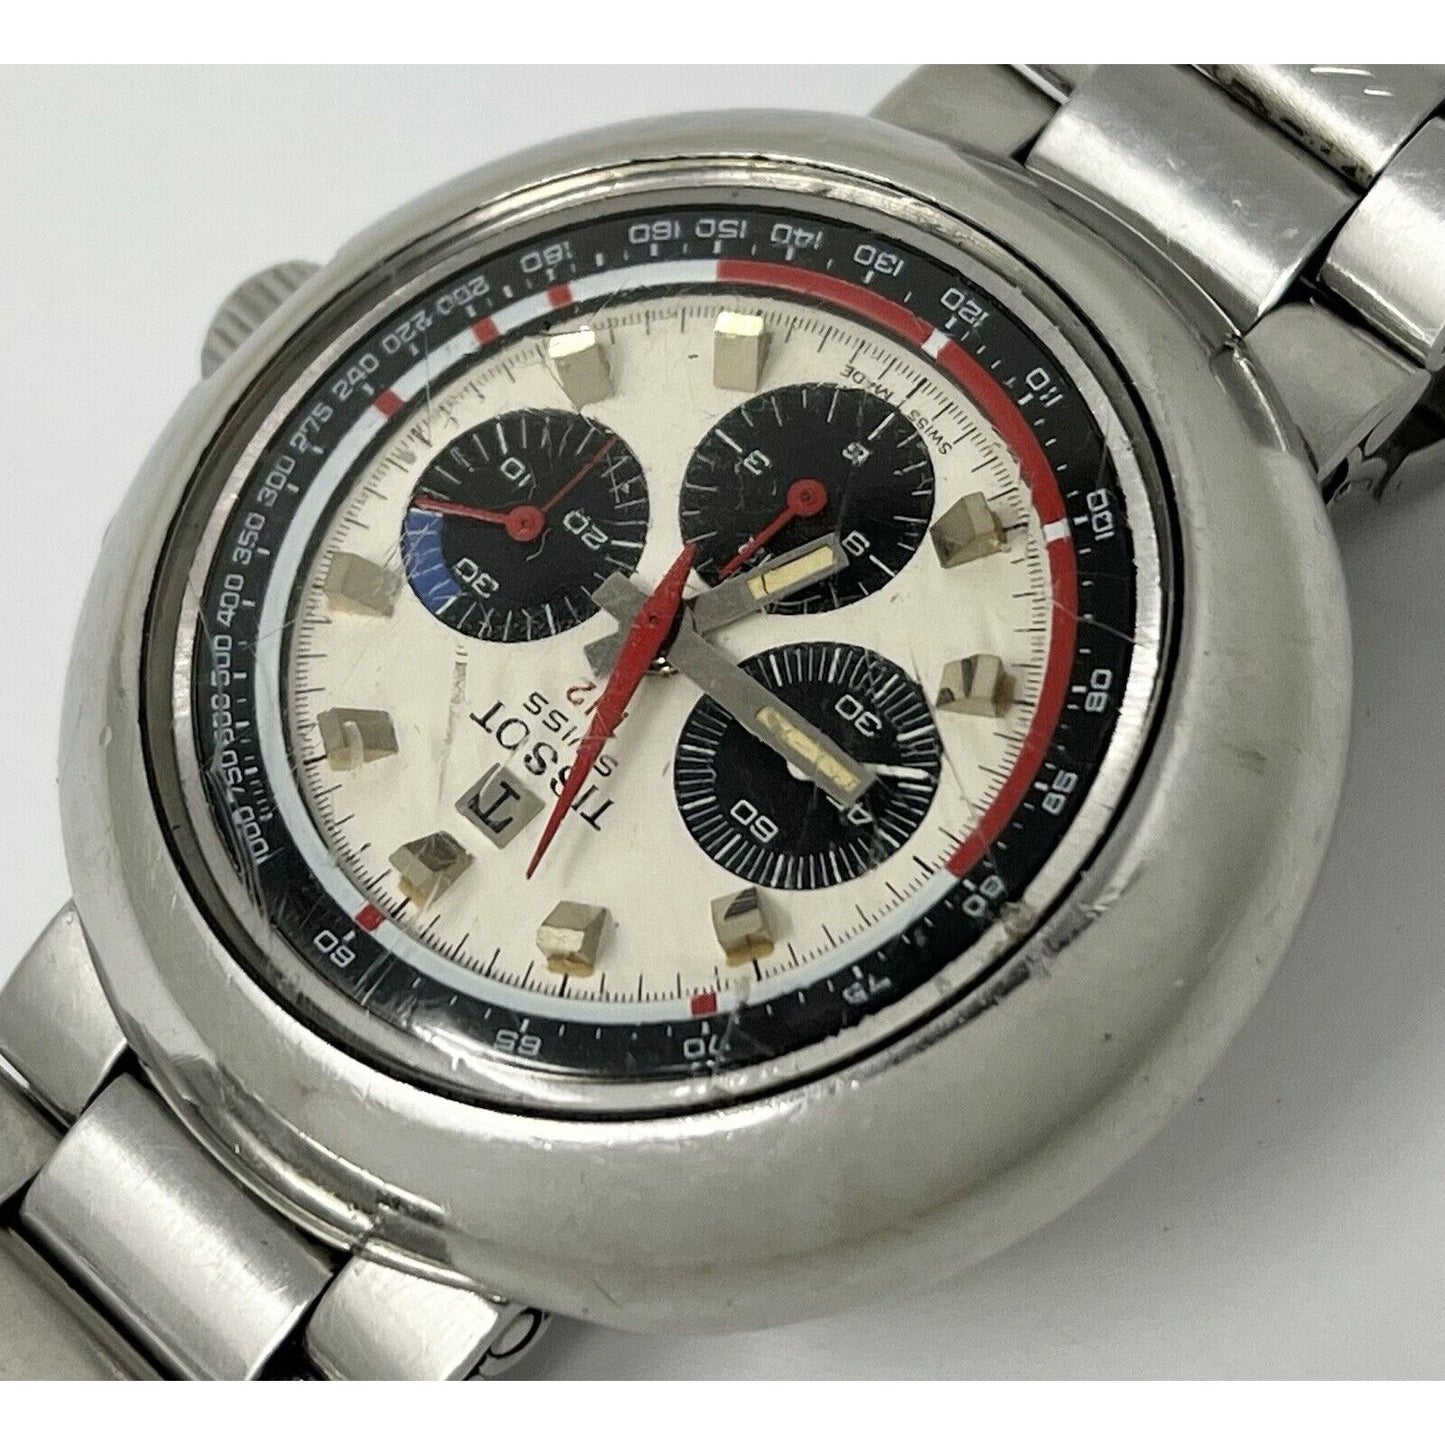 NEEDS SERVICE - Vintage Tissot T12 UFO Chronograph Stainless Steel Men's Watch